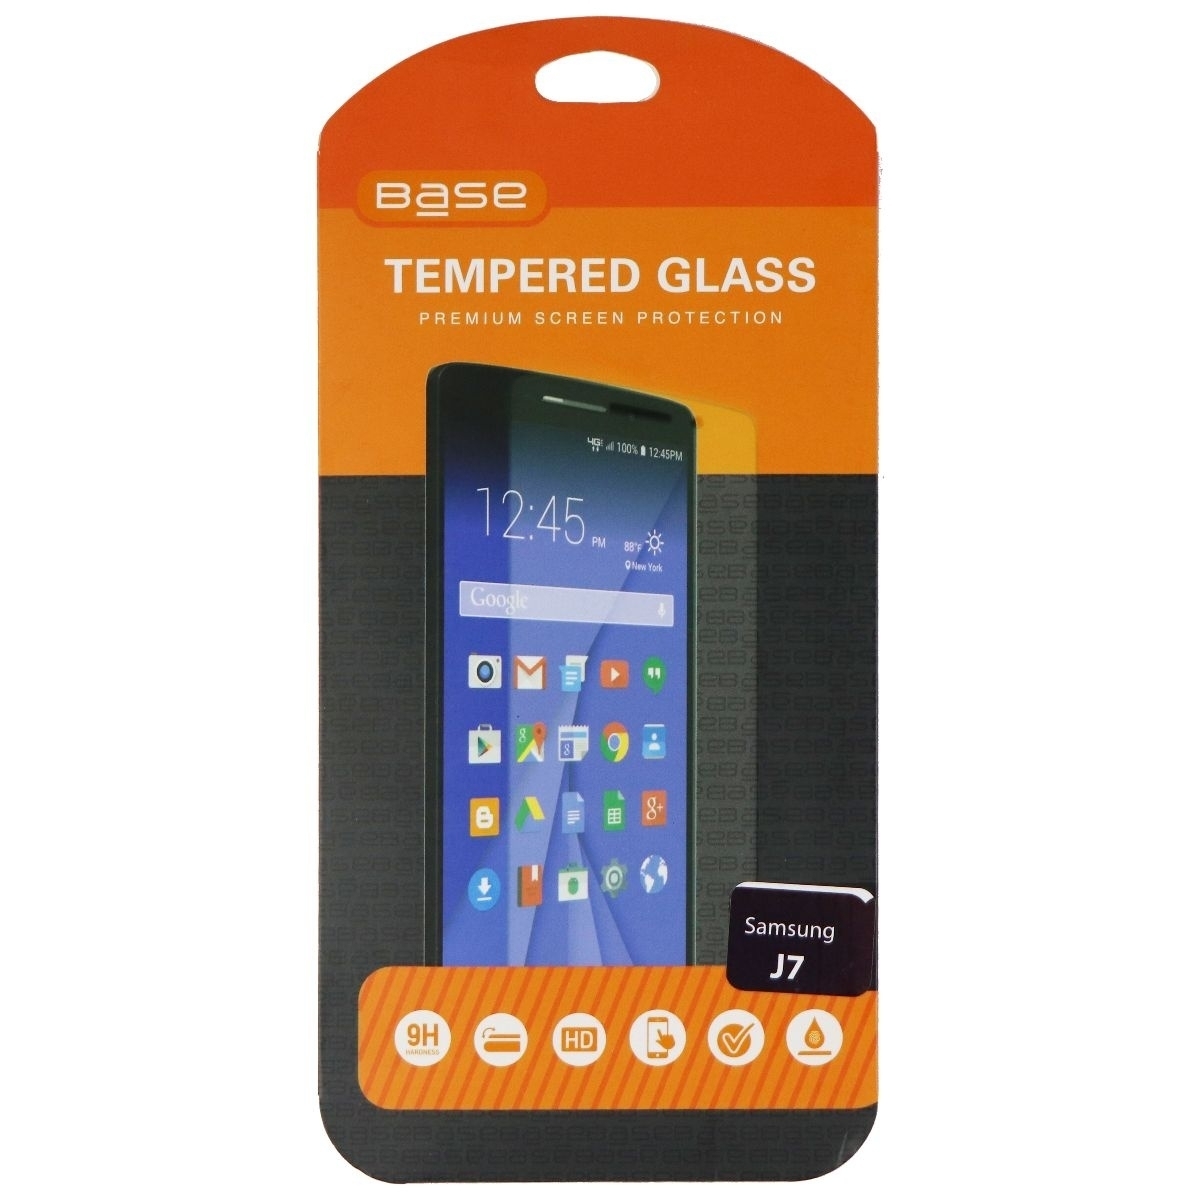 Base Tempered Glass Premium Screen Protector For Samsung Galaxy J7 - Clear